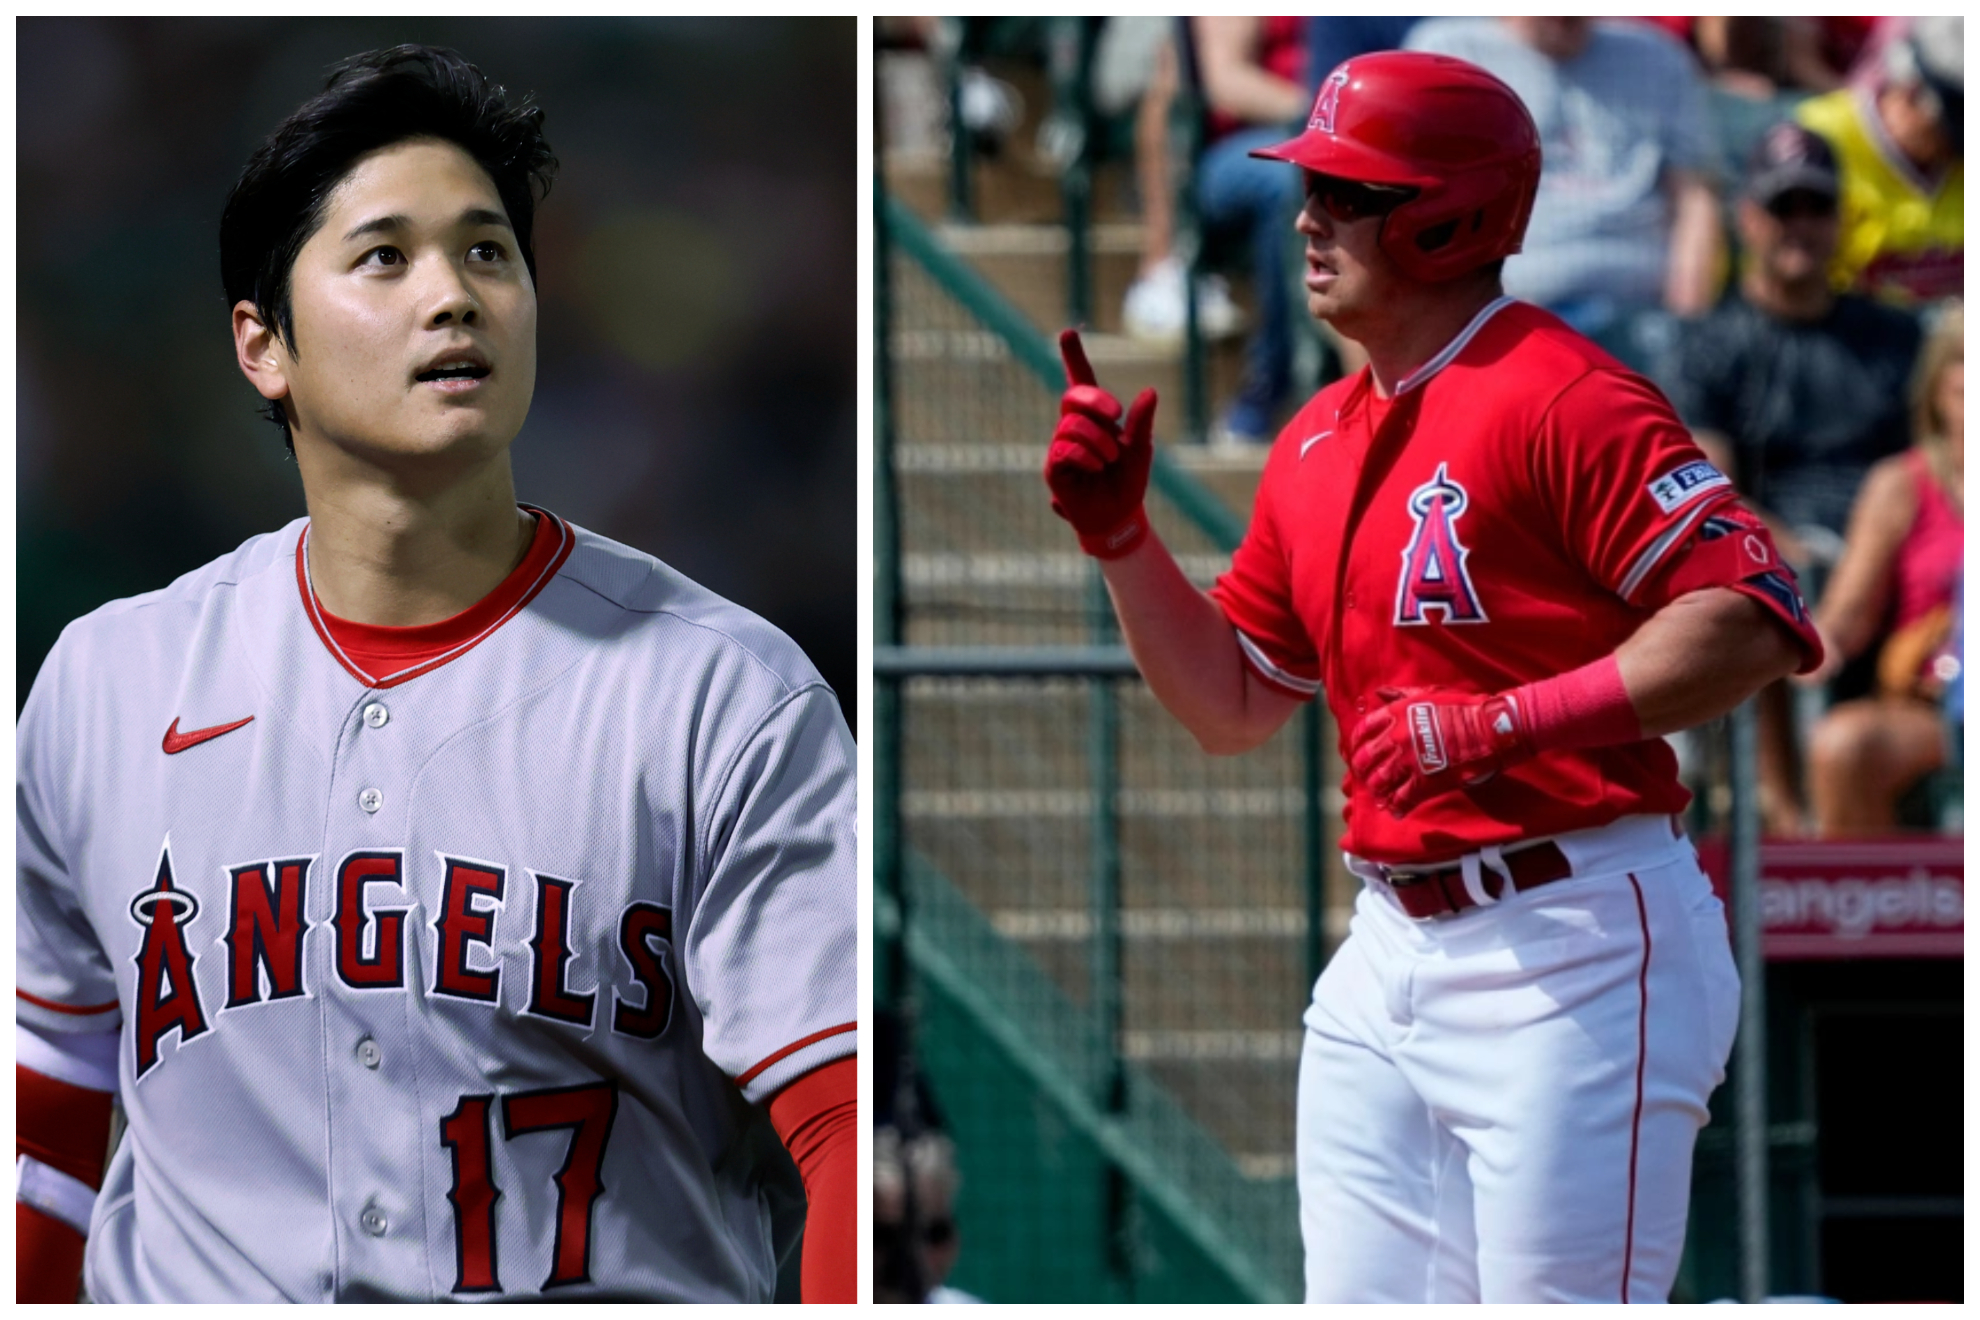 Hunter Renfroe and Shohei Ohtani lost on Opening Day against the A's.